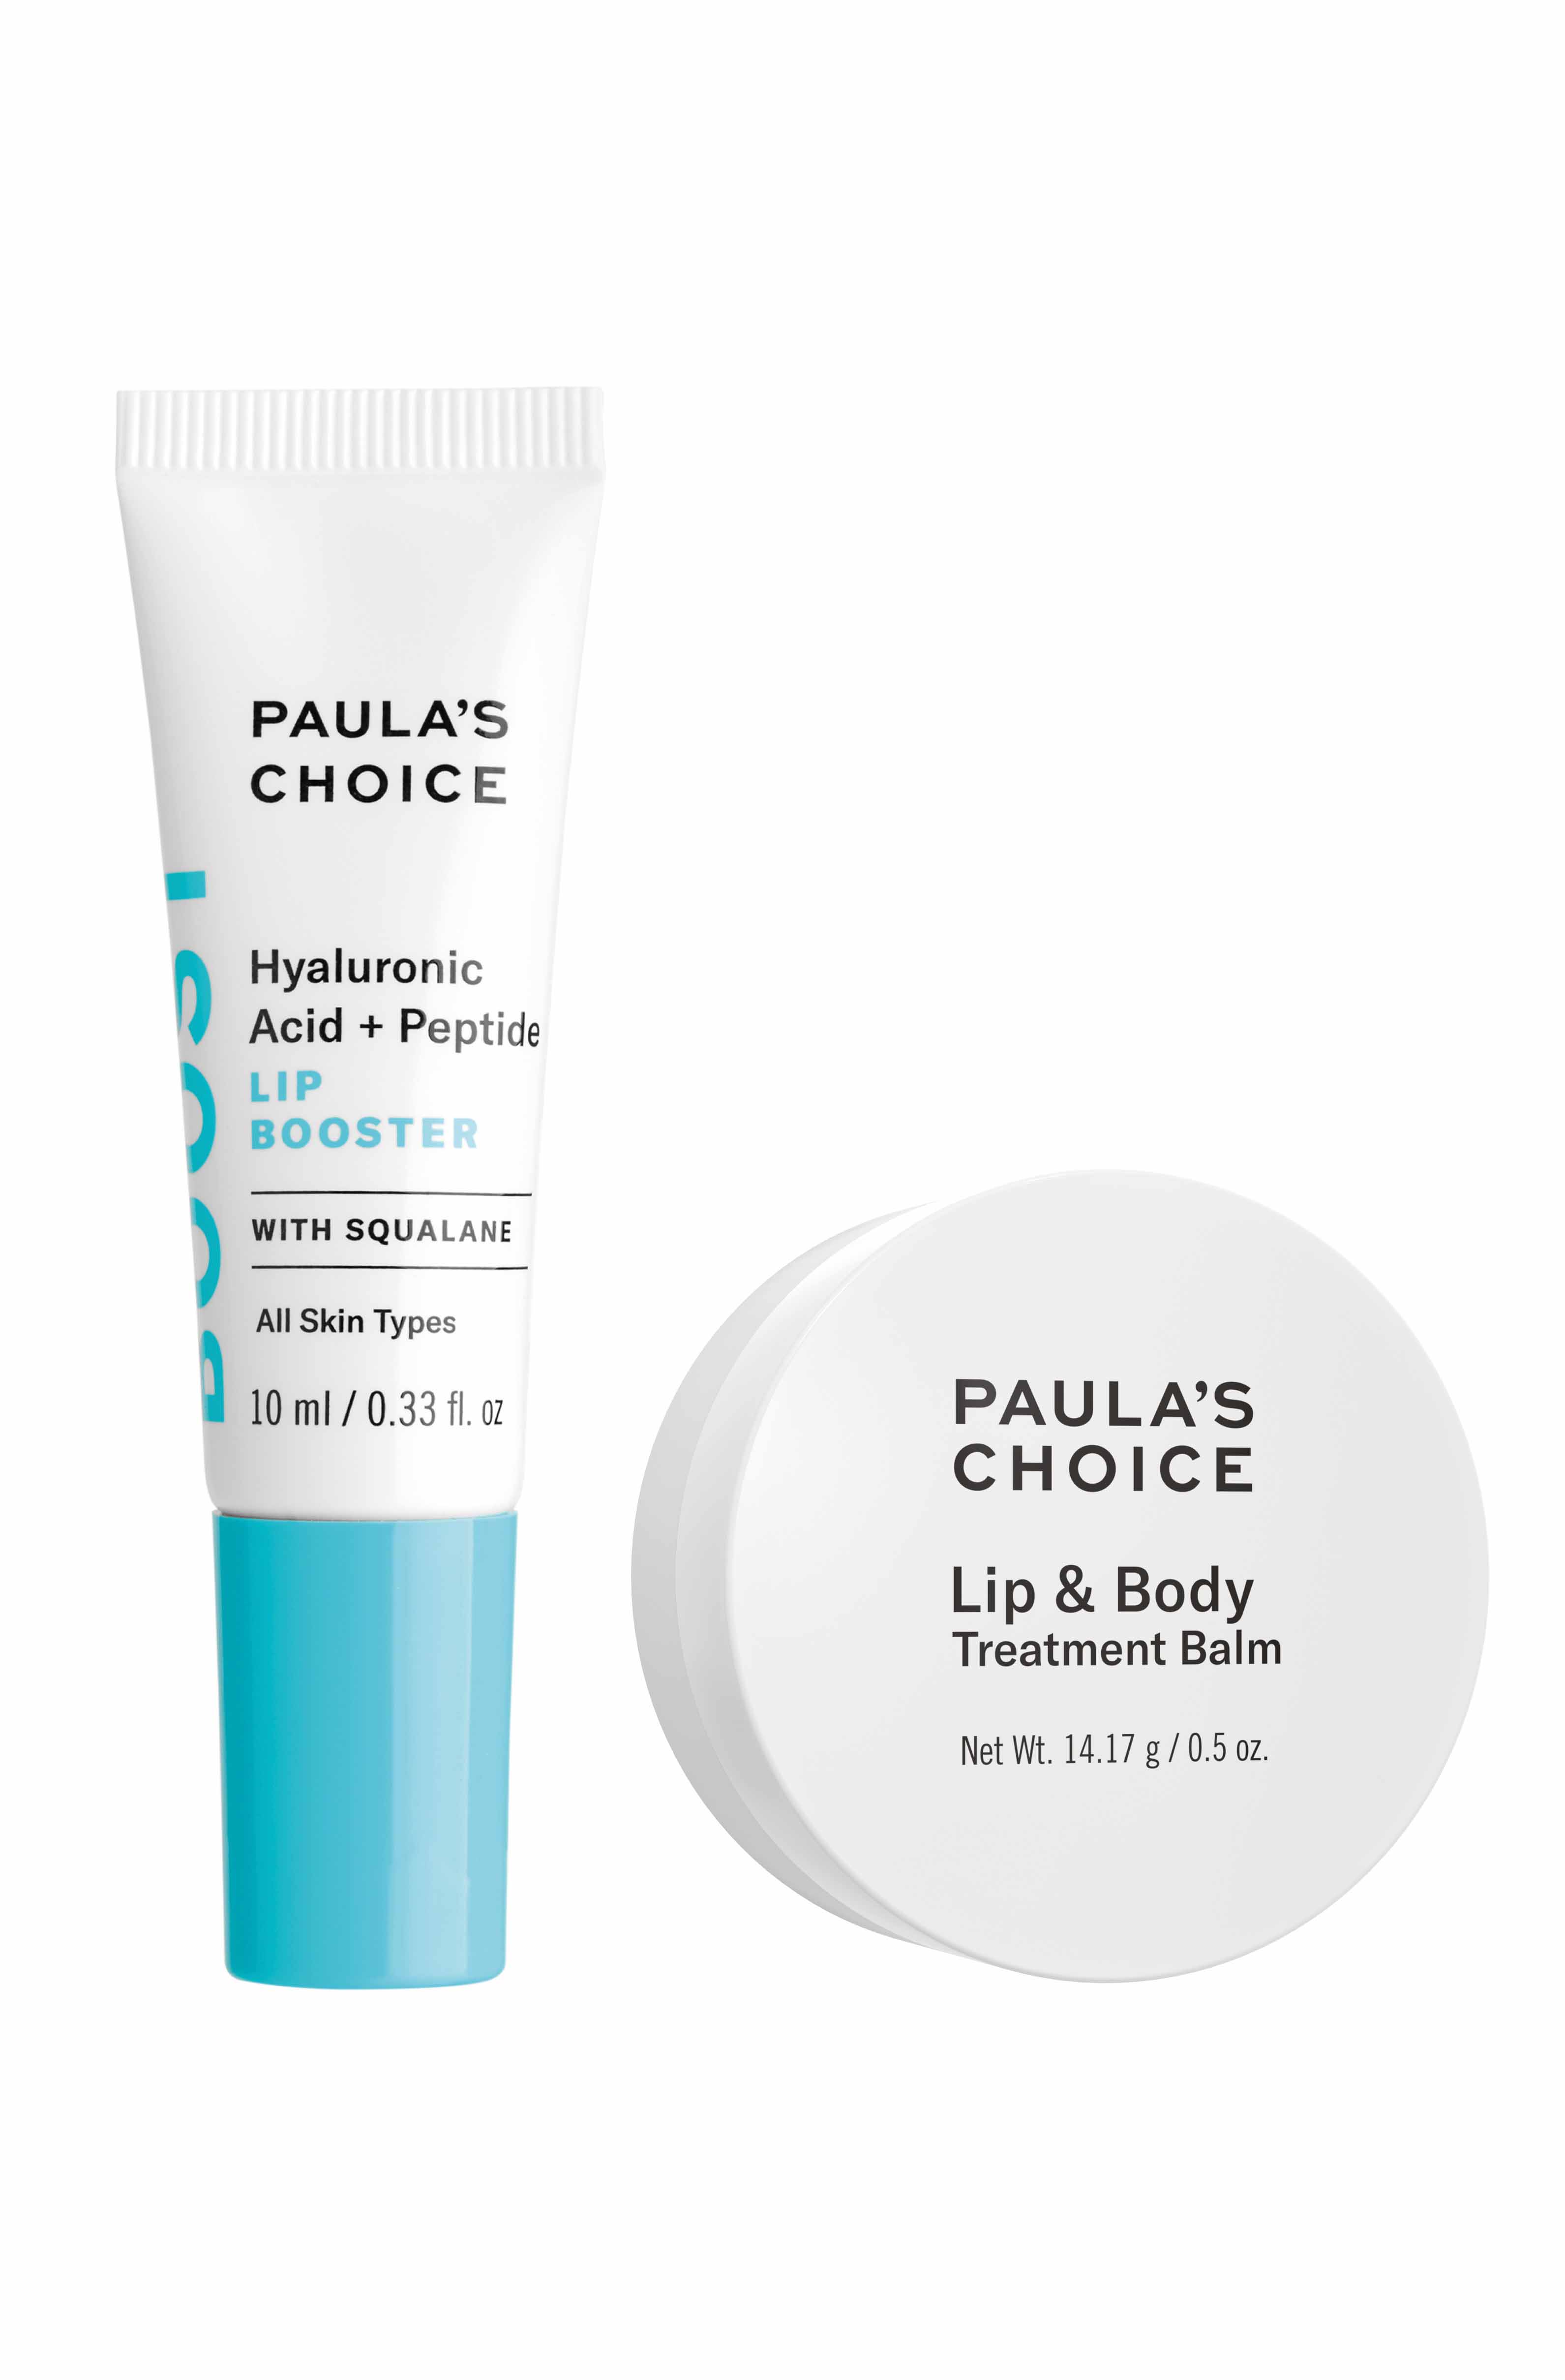 Hydrate + smooth lips